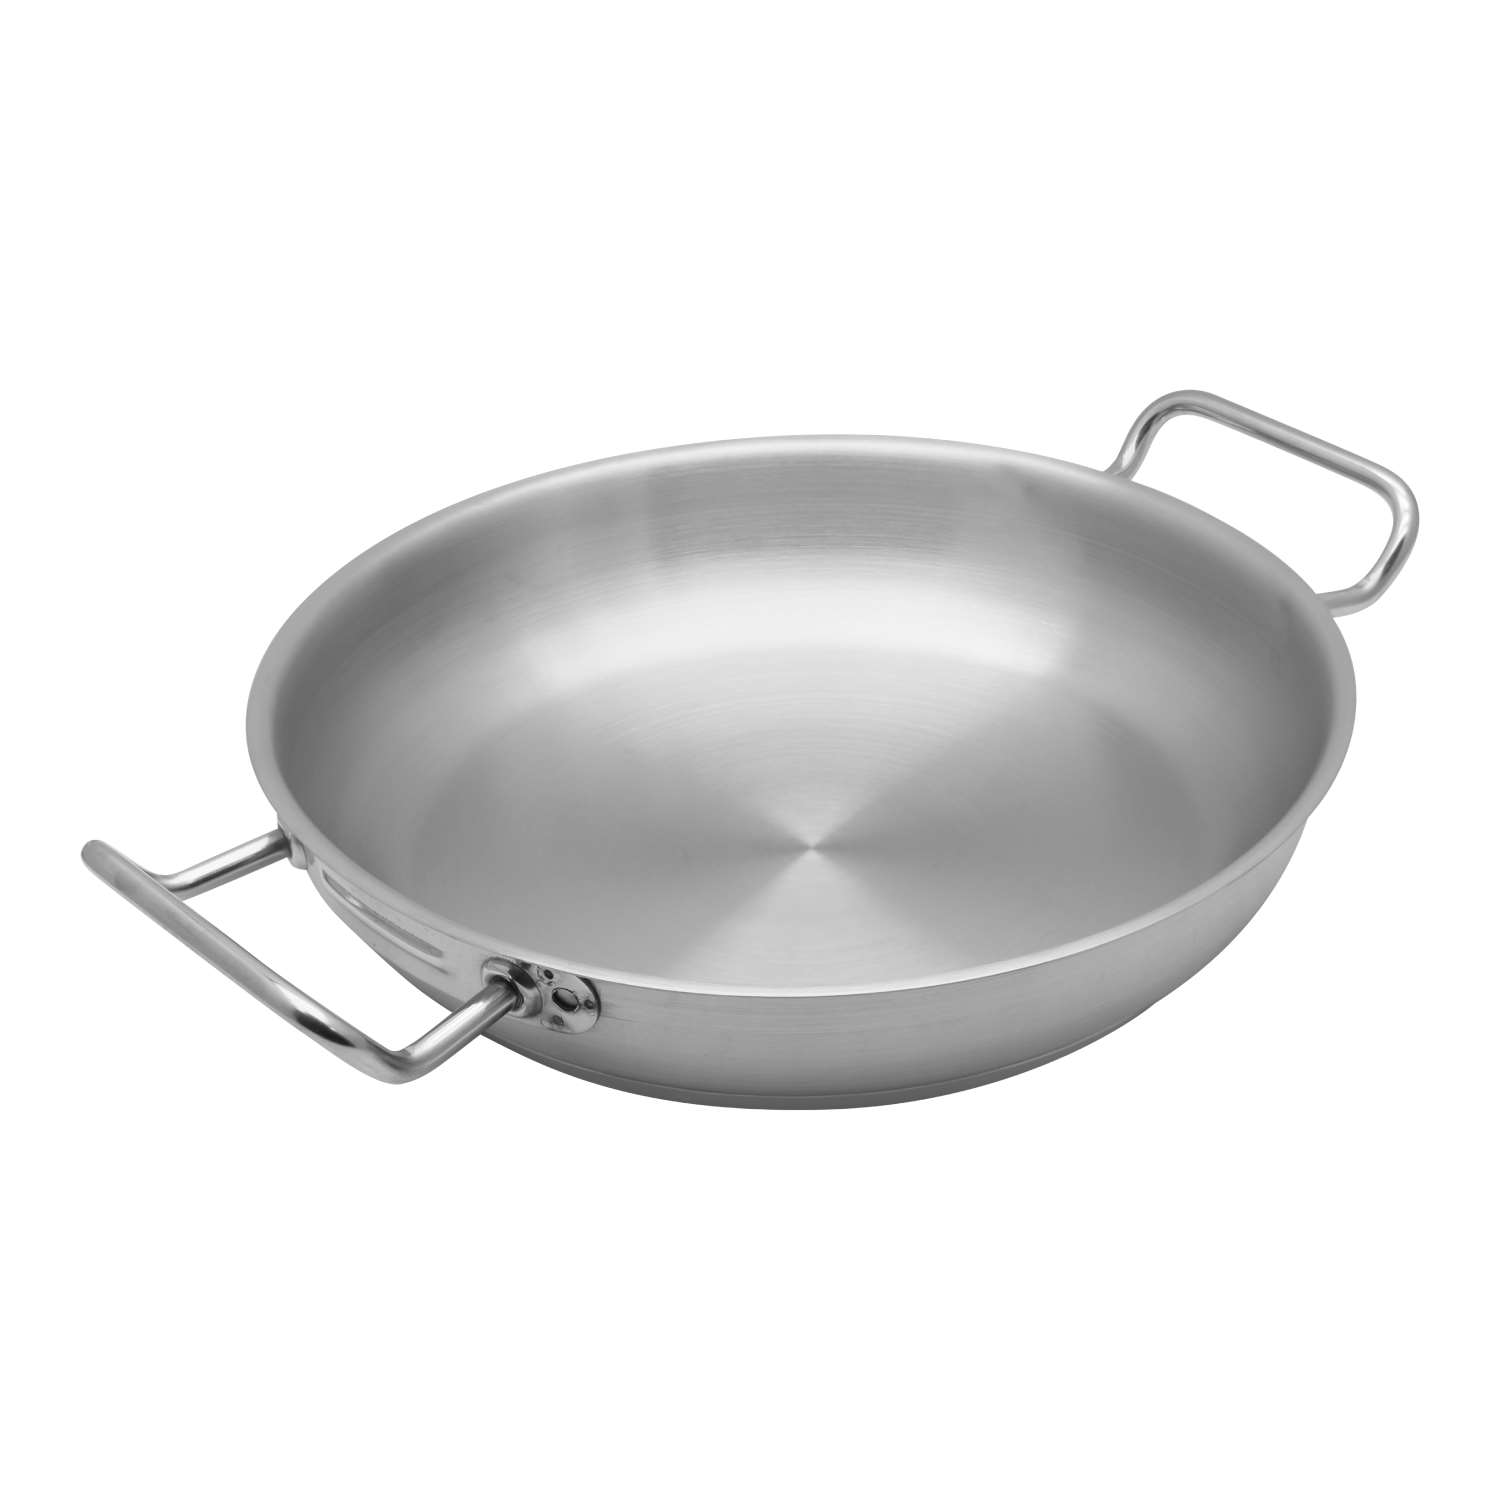 Chefset Steel Fry Pan With Side Handle